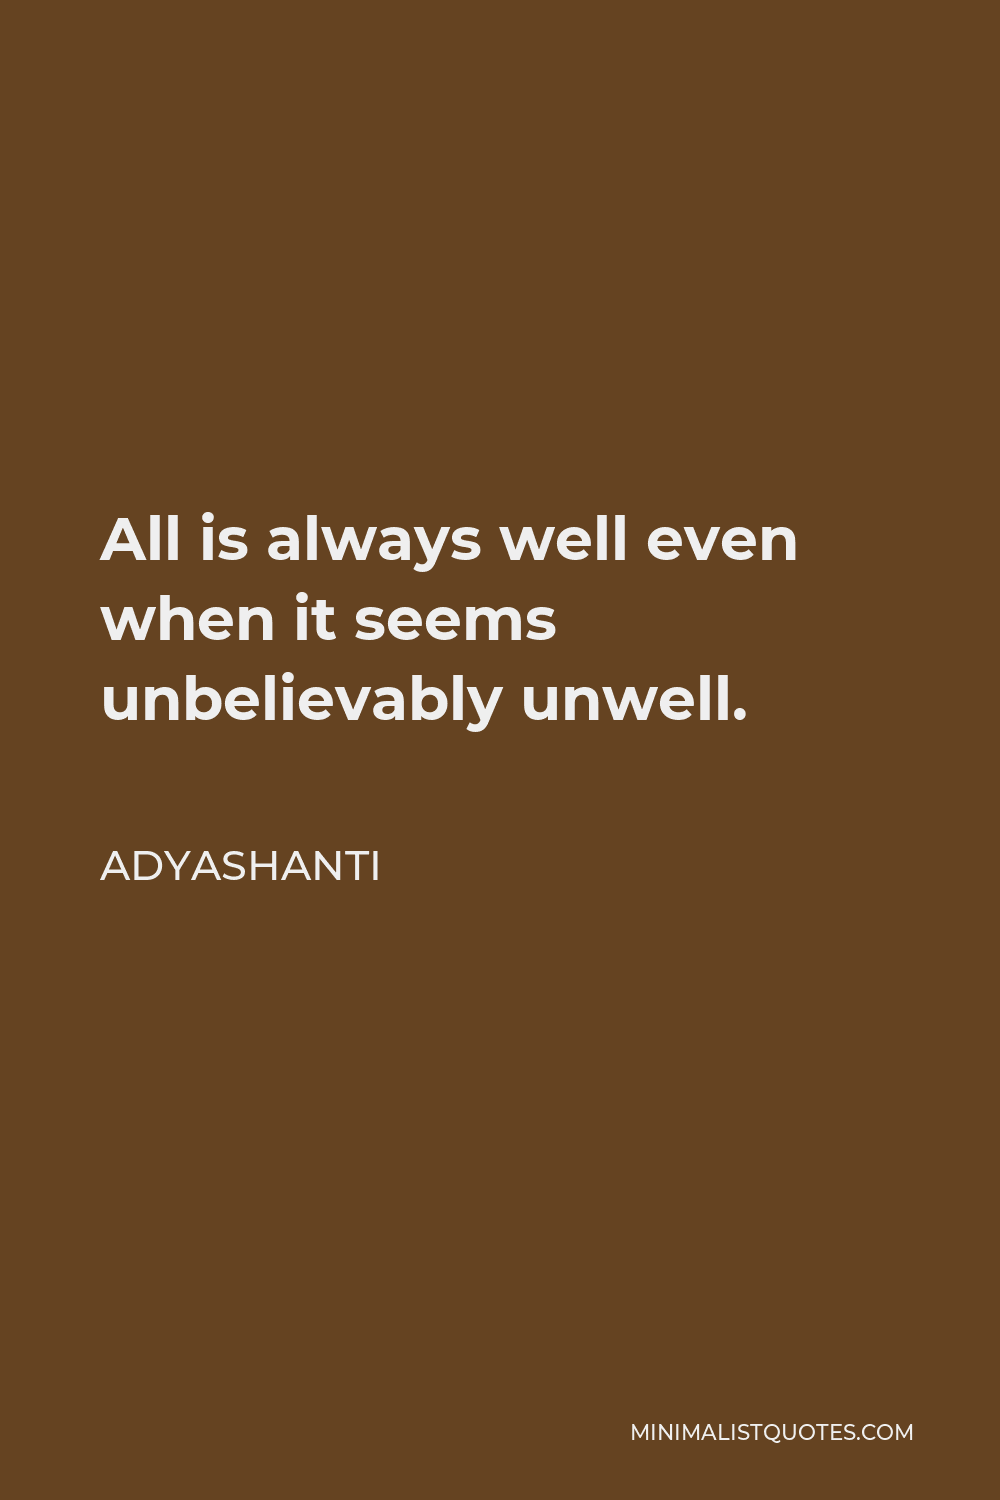 Adyashanti Quote - All is always well even when it seems unbelievably unwell.